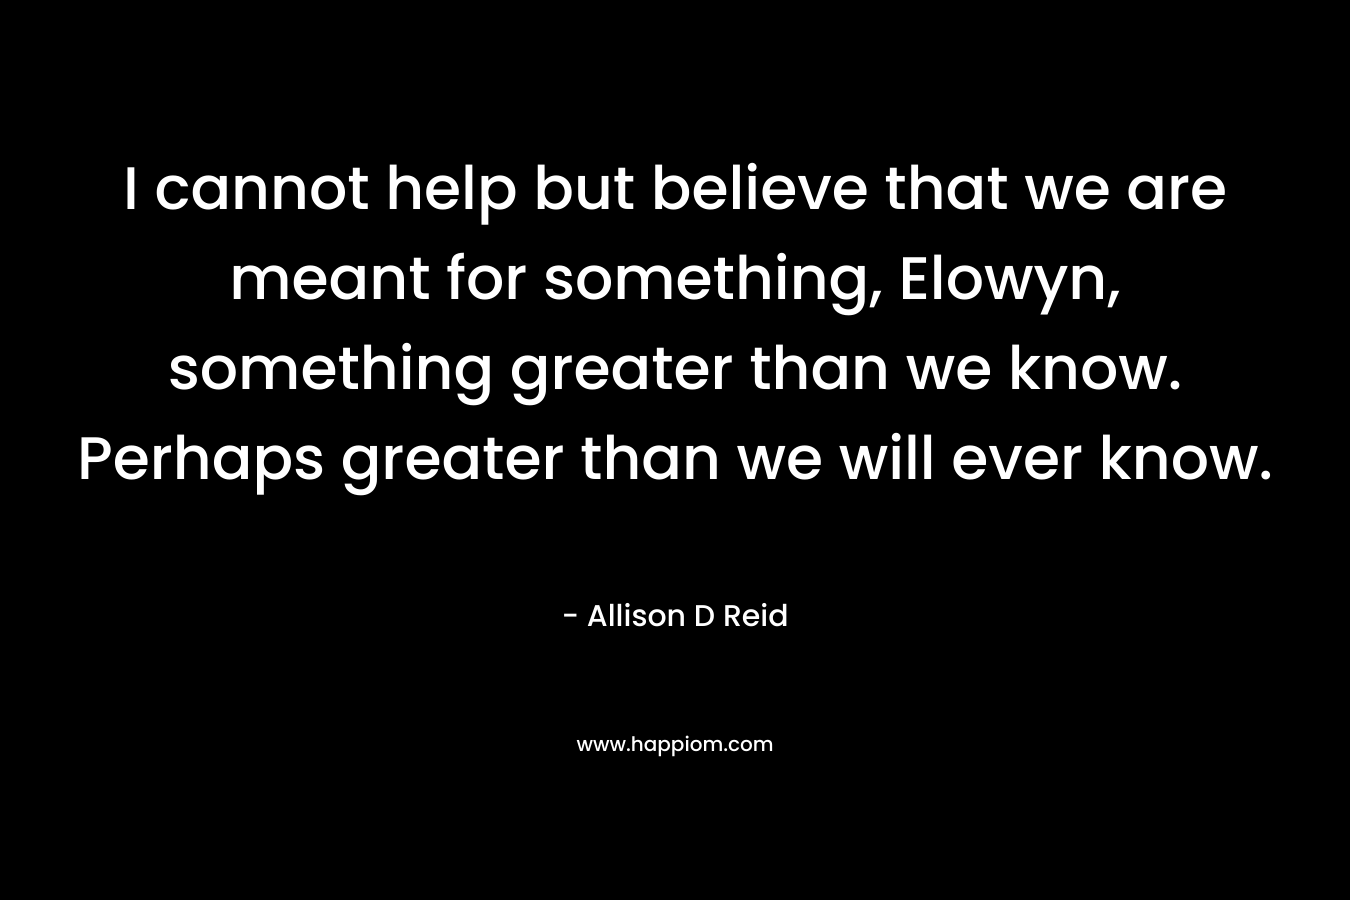 I cannot help but believe that we are meant for something, Elowyn, something greater than we know. Perhaps greater than we will ever know.